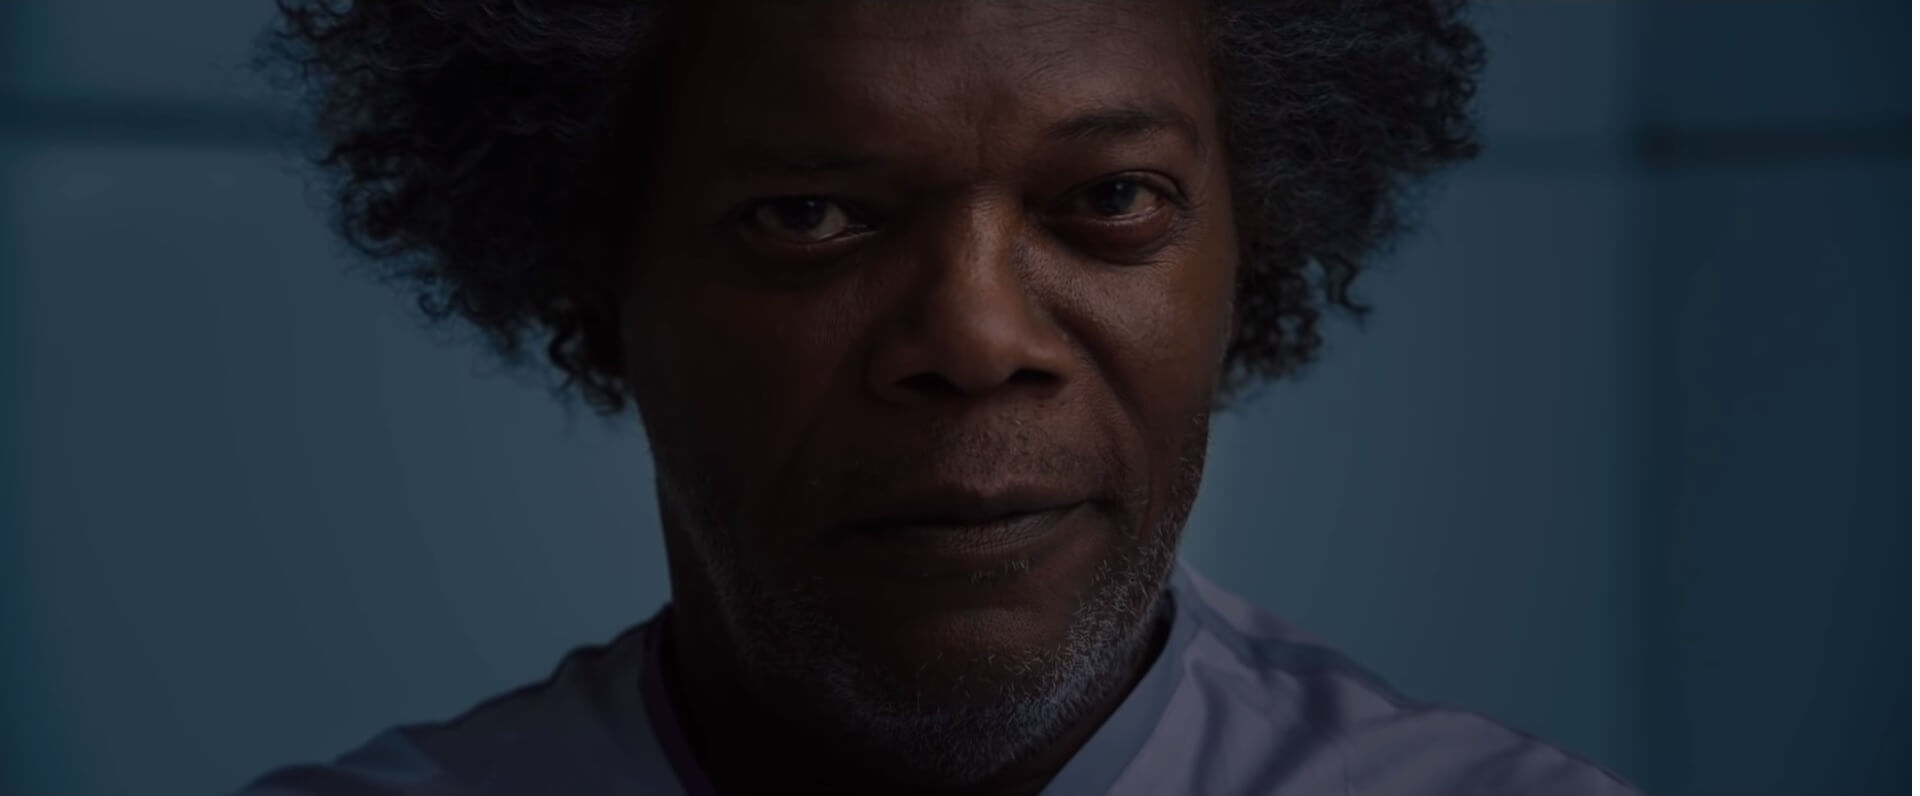 Glass 2019 HD Images6